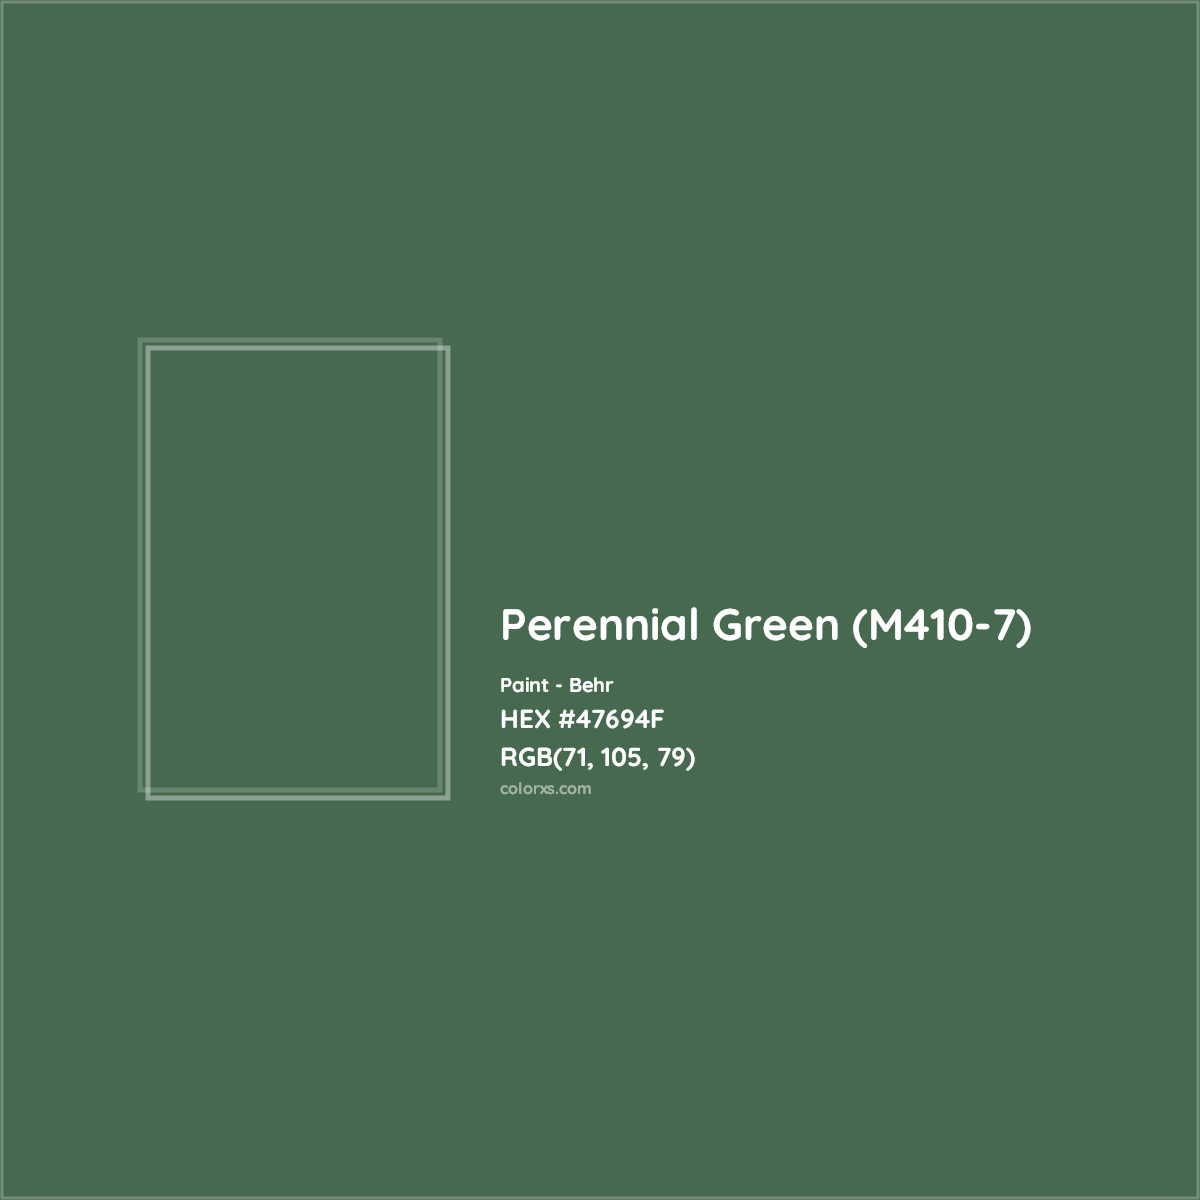 HEX #47694F Perennial Green (M410-7) Paint Behr - Color Code